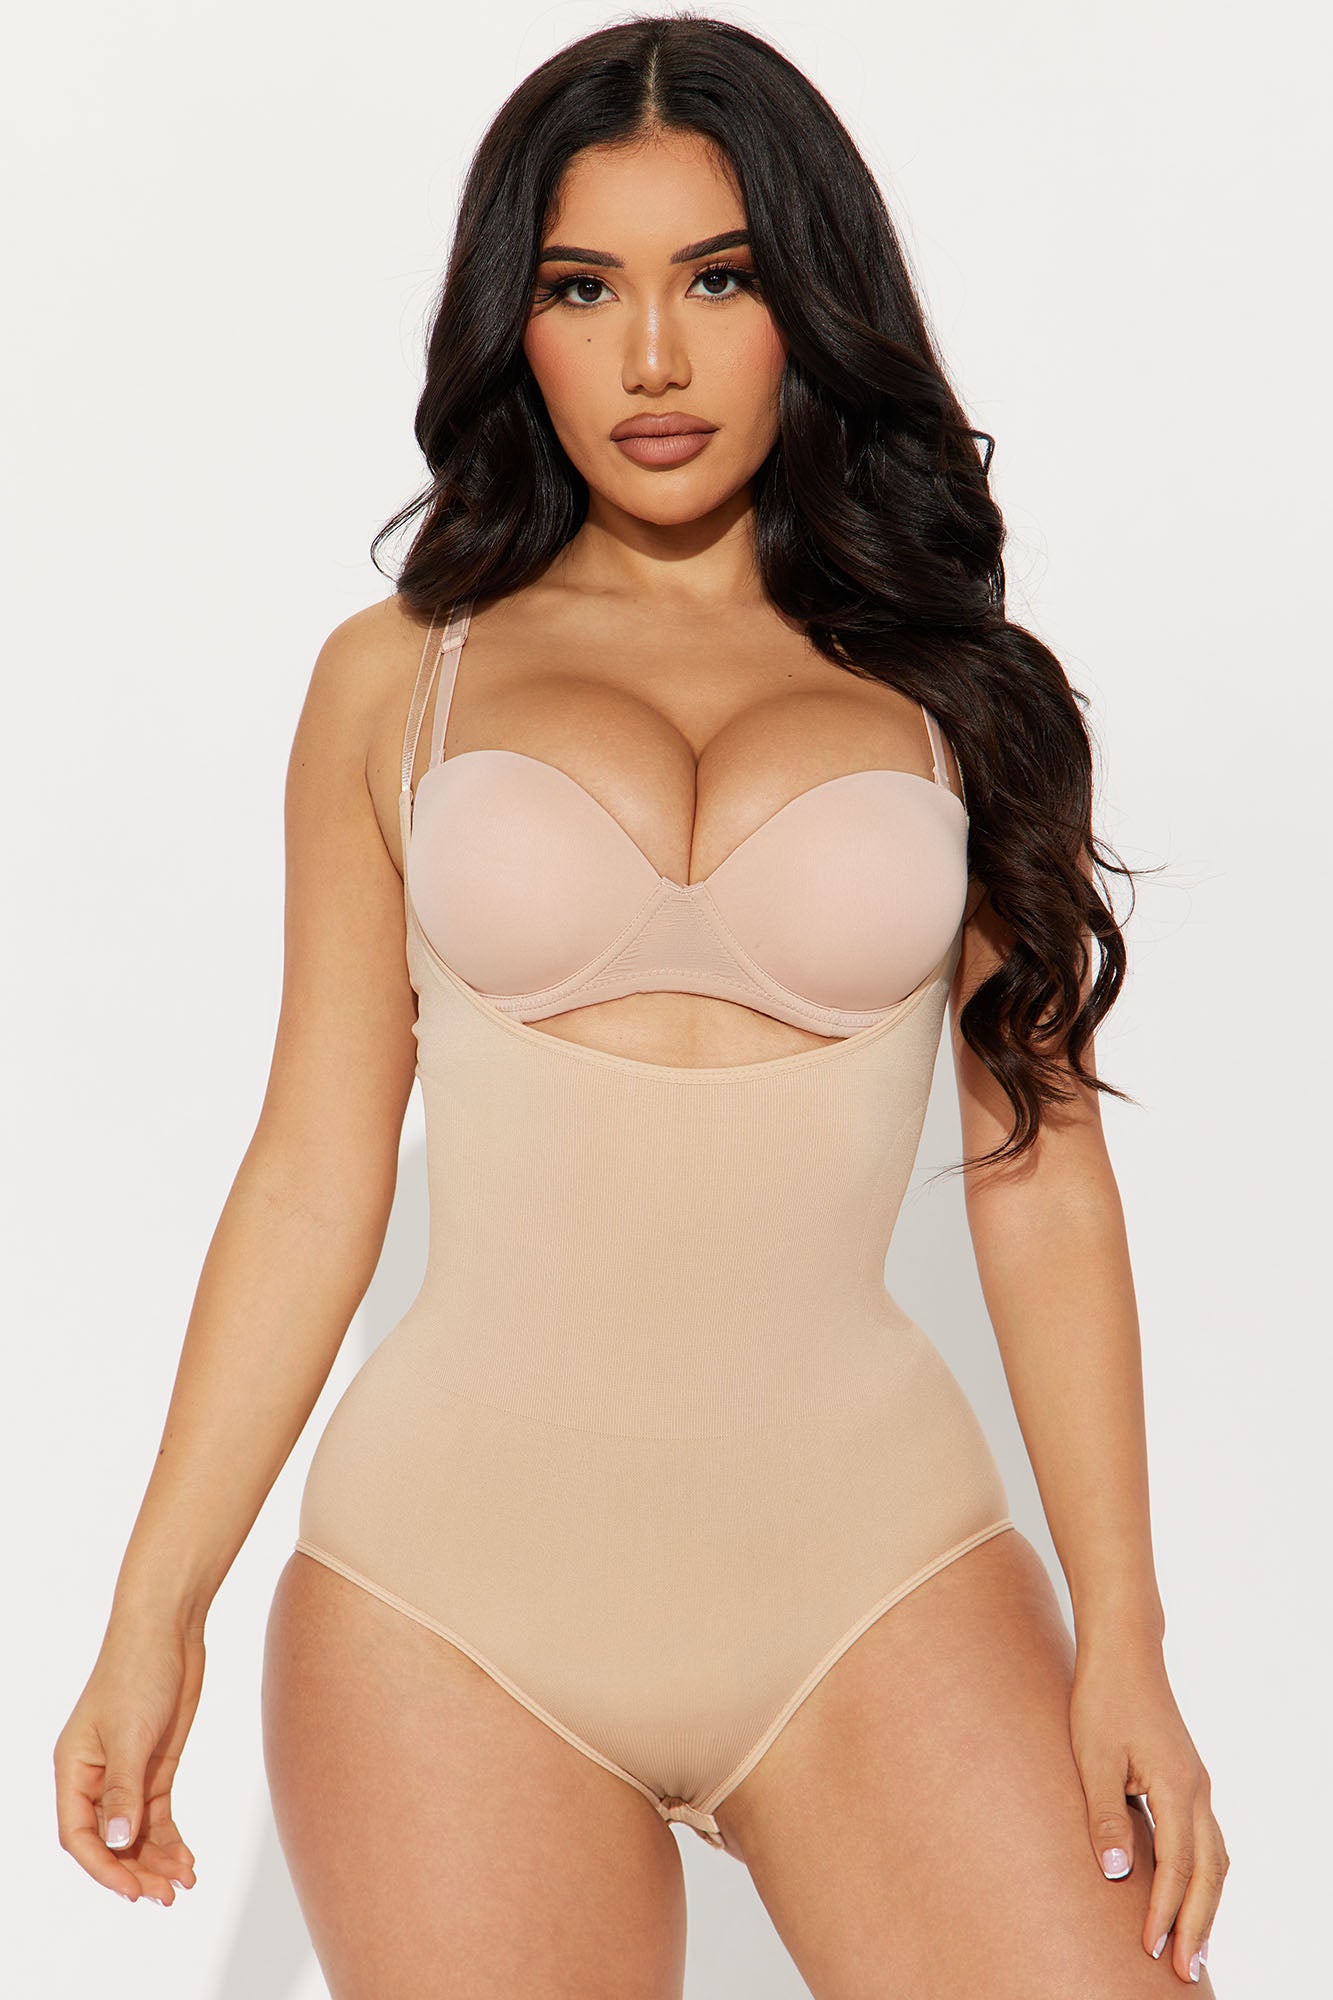 Women's Nude Shapewear Bodysuit With Adjustable Straps and Snap Button  Closure, Be Wicked